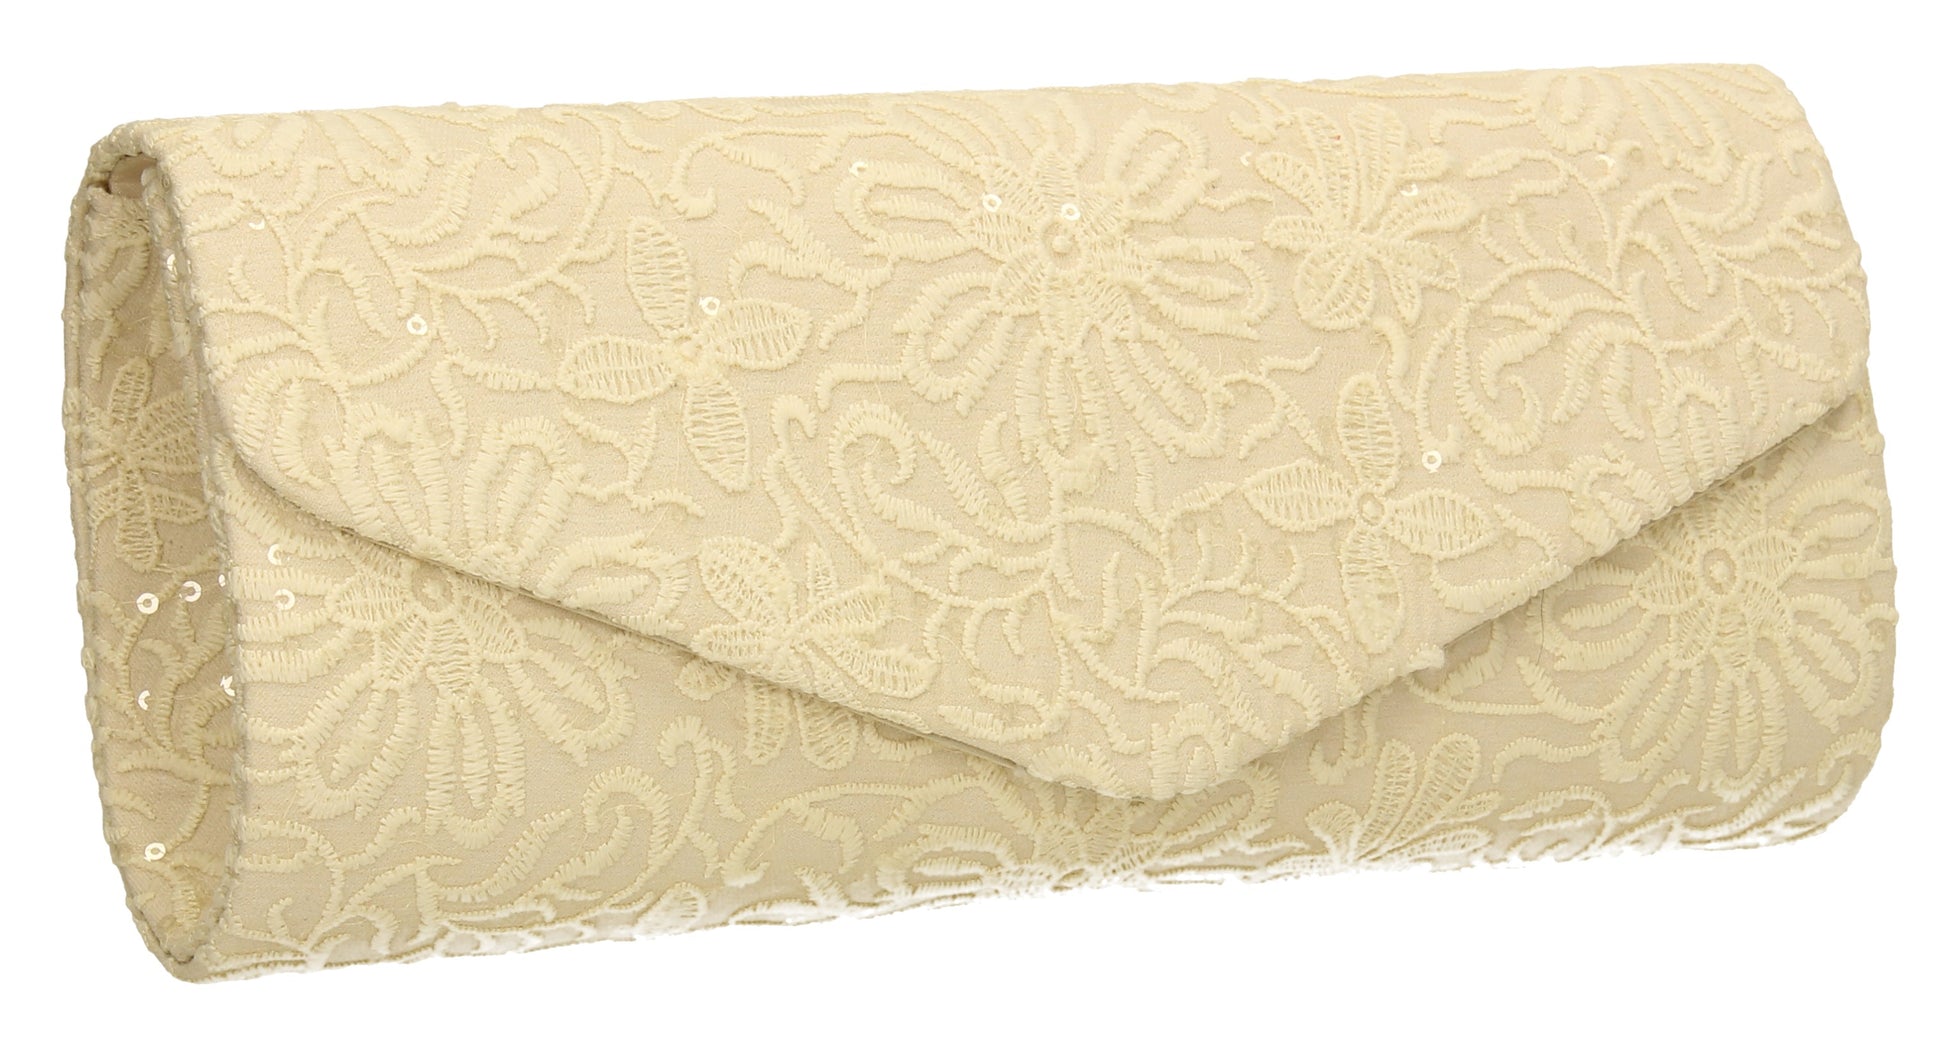 SWANKYSWANS Julia Lace Sequin Clutch Bag Ivory Cute Cheap Clutch Bag For Weddings School and Work